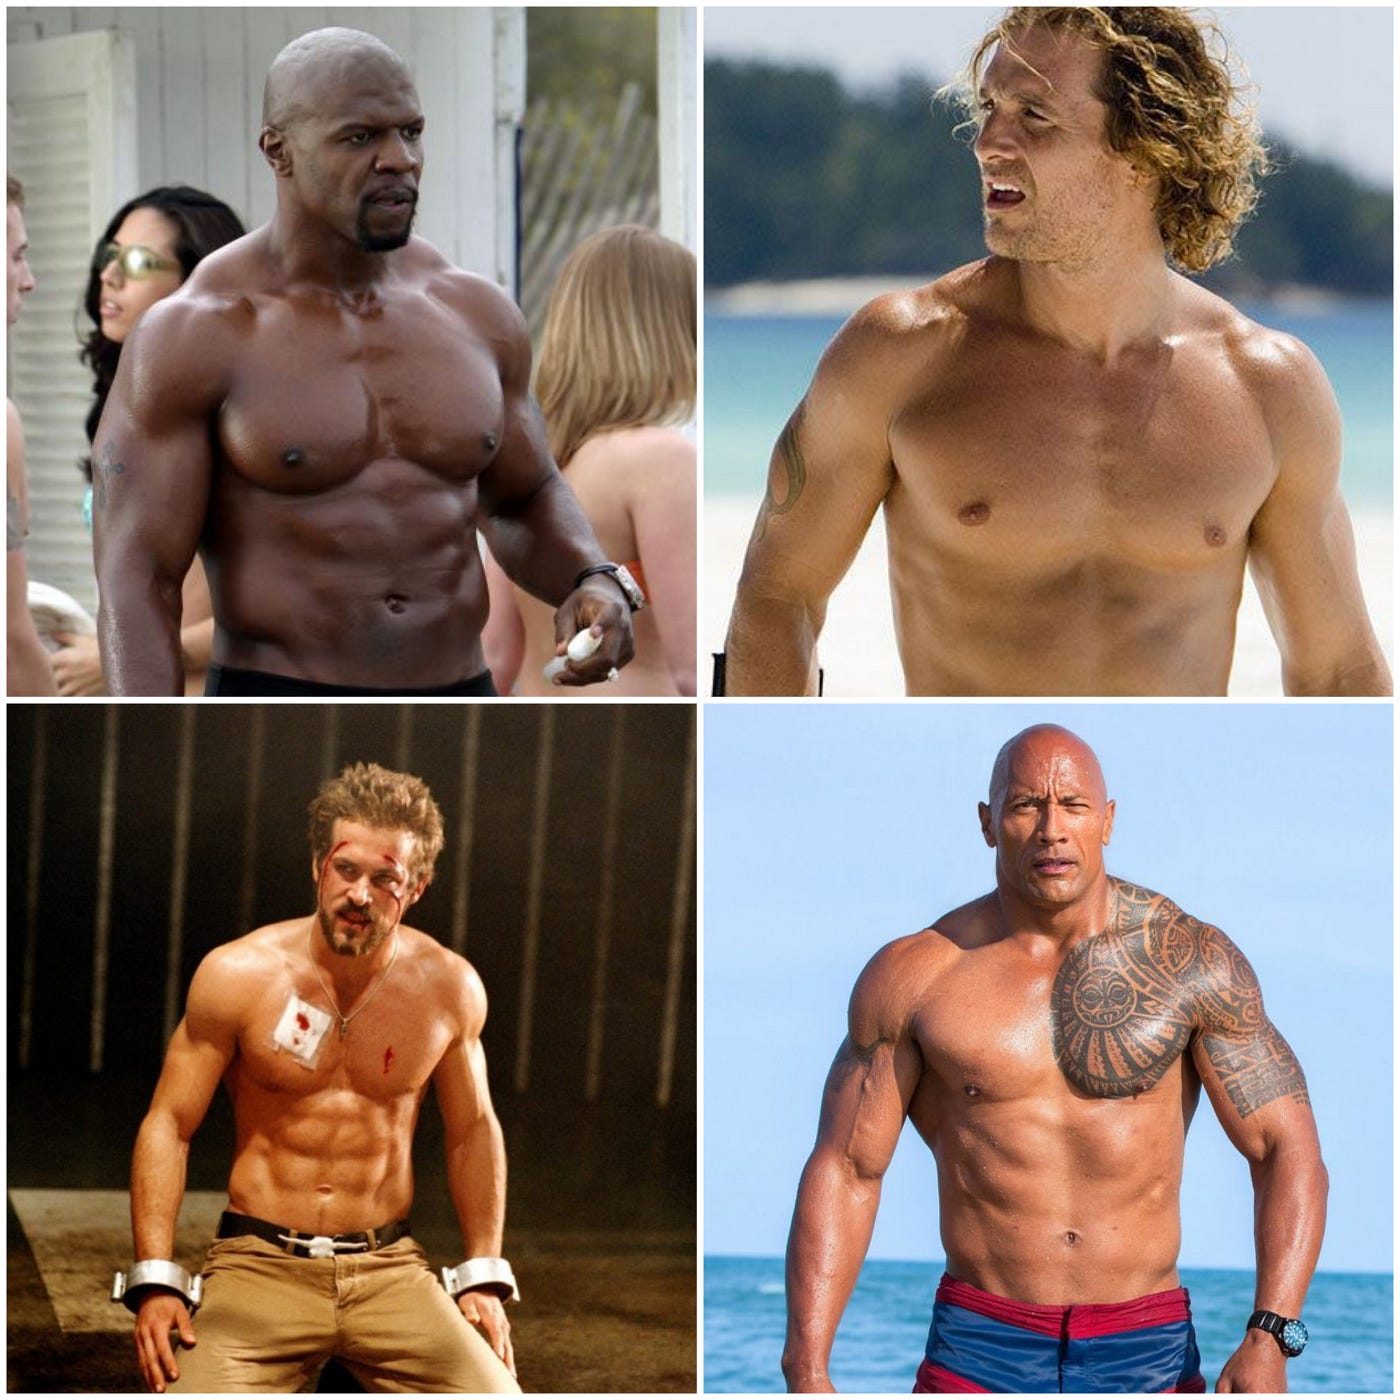 BUFF]ET : Washboard Abs vs. The Dad Bod in Popular Media | by Carrie |  COMM430GU | Medium